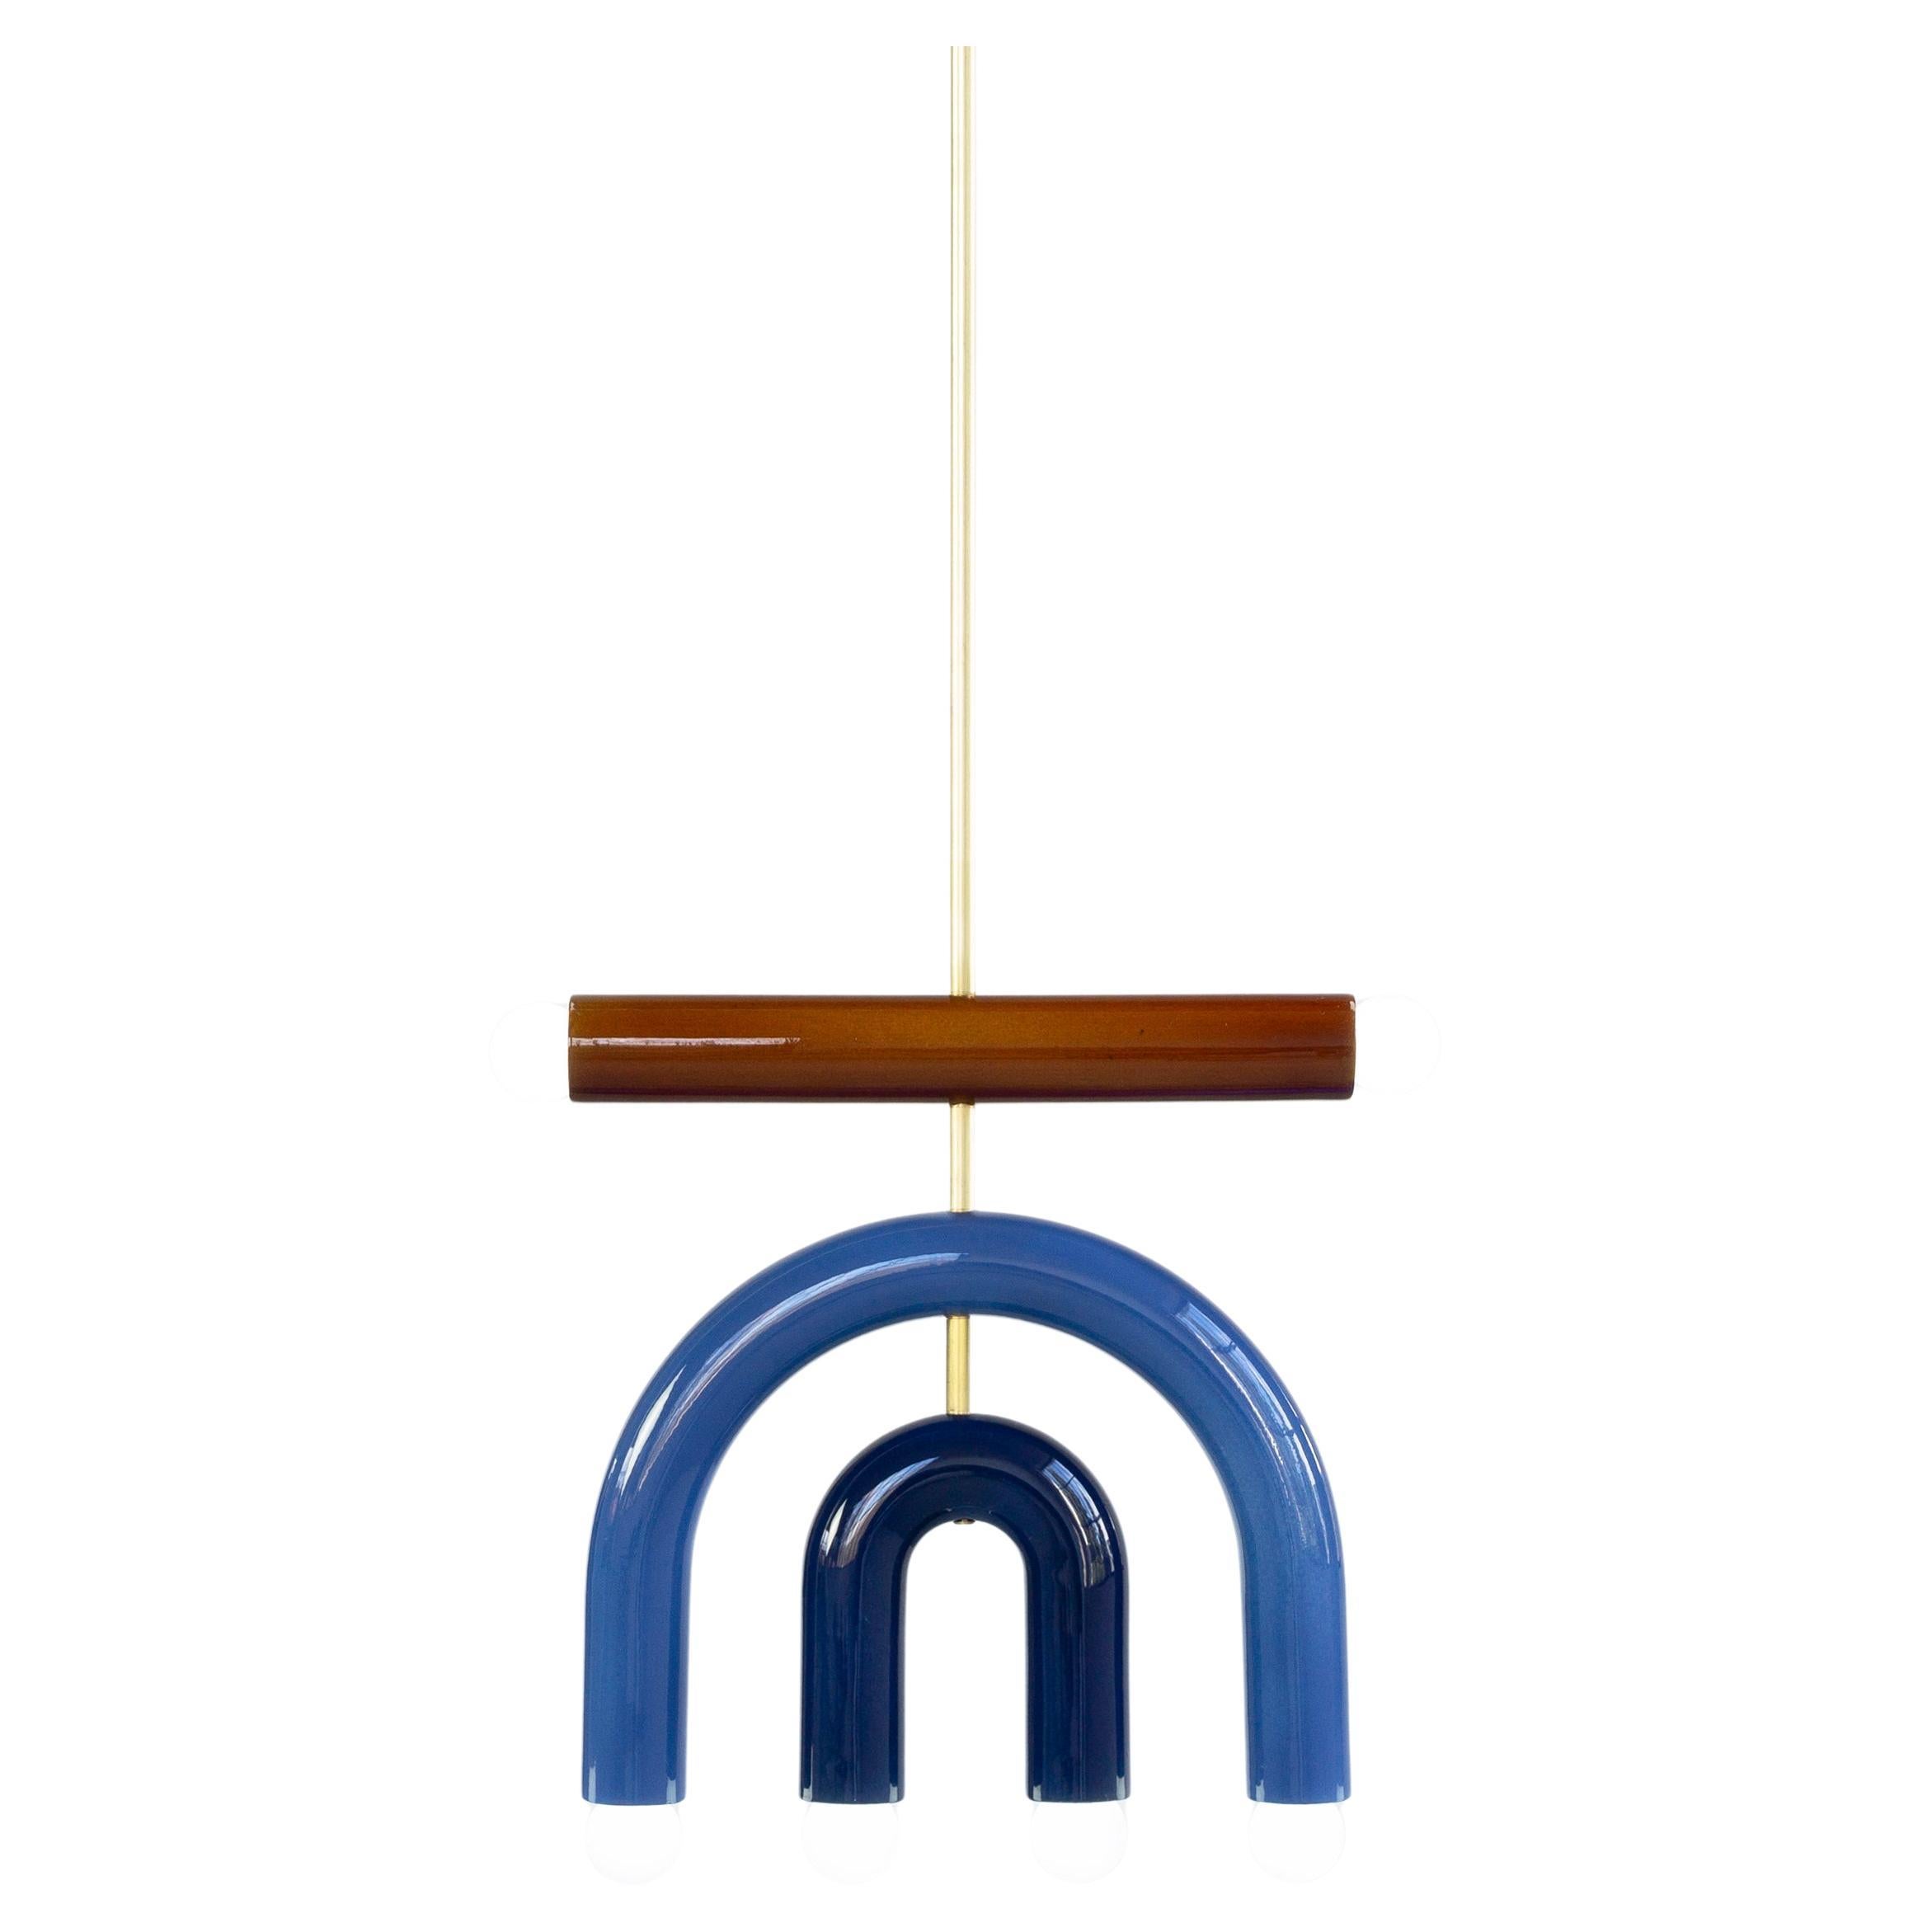 TRN D1 Pendant lamp / ceiling lamp / chandelier 
Designer: Pani Jurek

Model shown: Brown, Light blue, Brown, Brass rod
Dimensions: H 37.5 x 35 x 5 cm

Bulb (not included): E27/E26, compatible with US electric system

Materials: Hand glazed ceramic